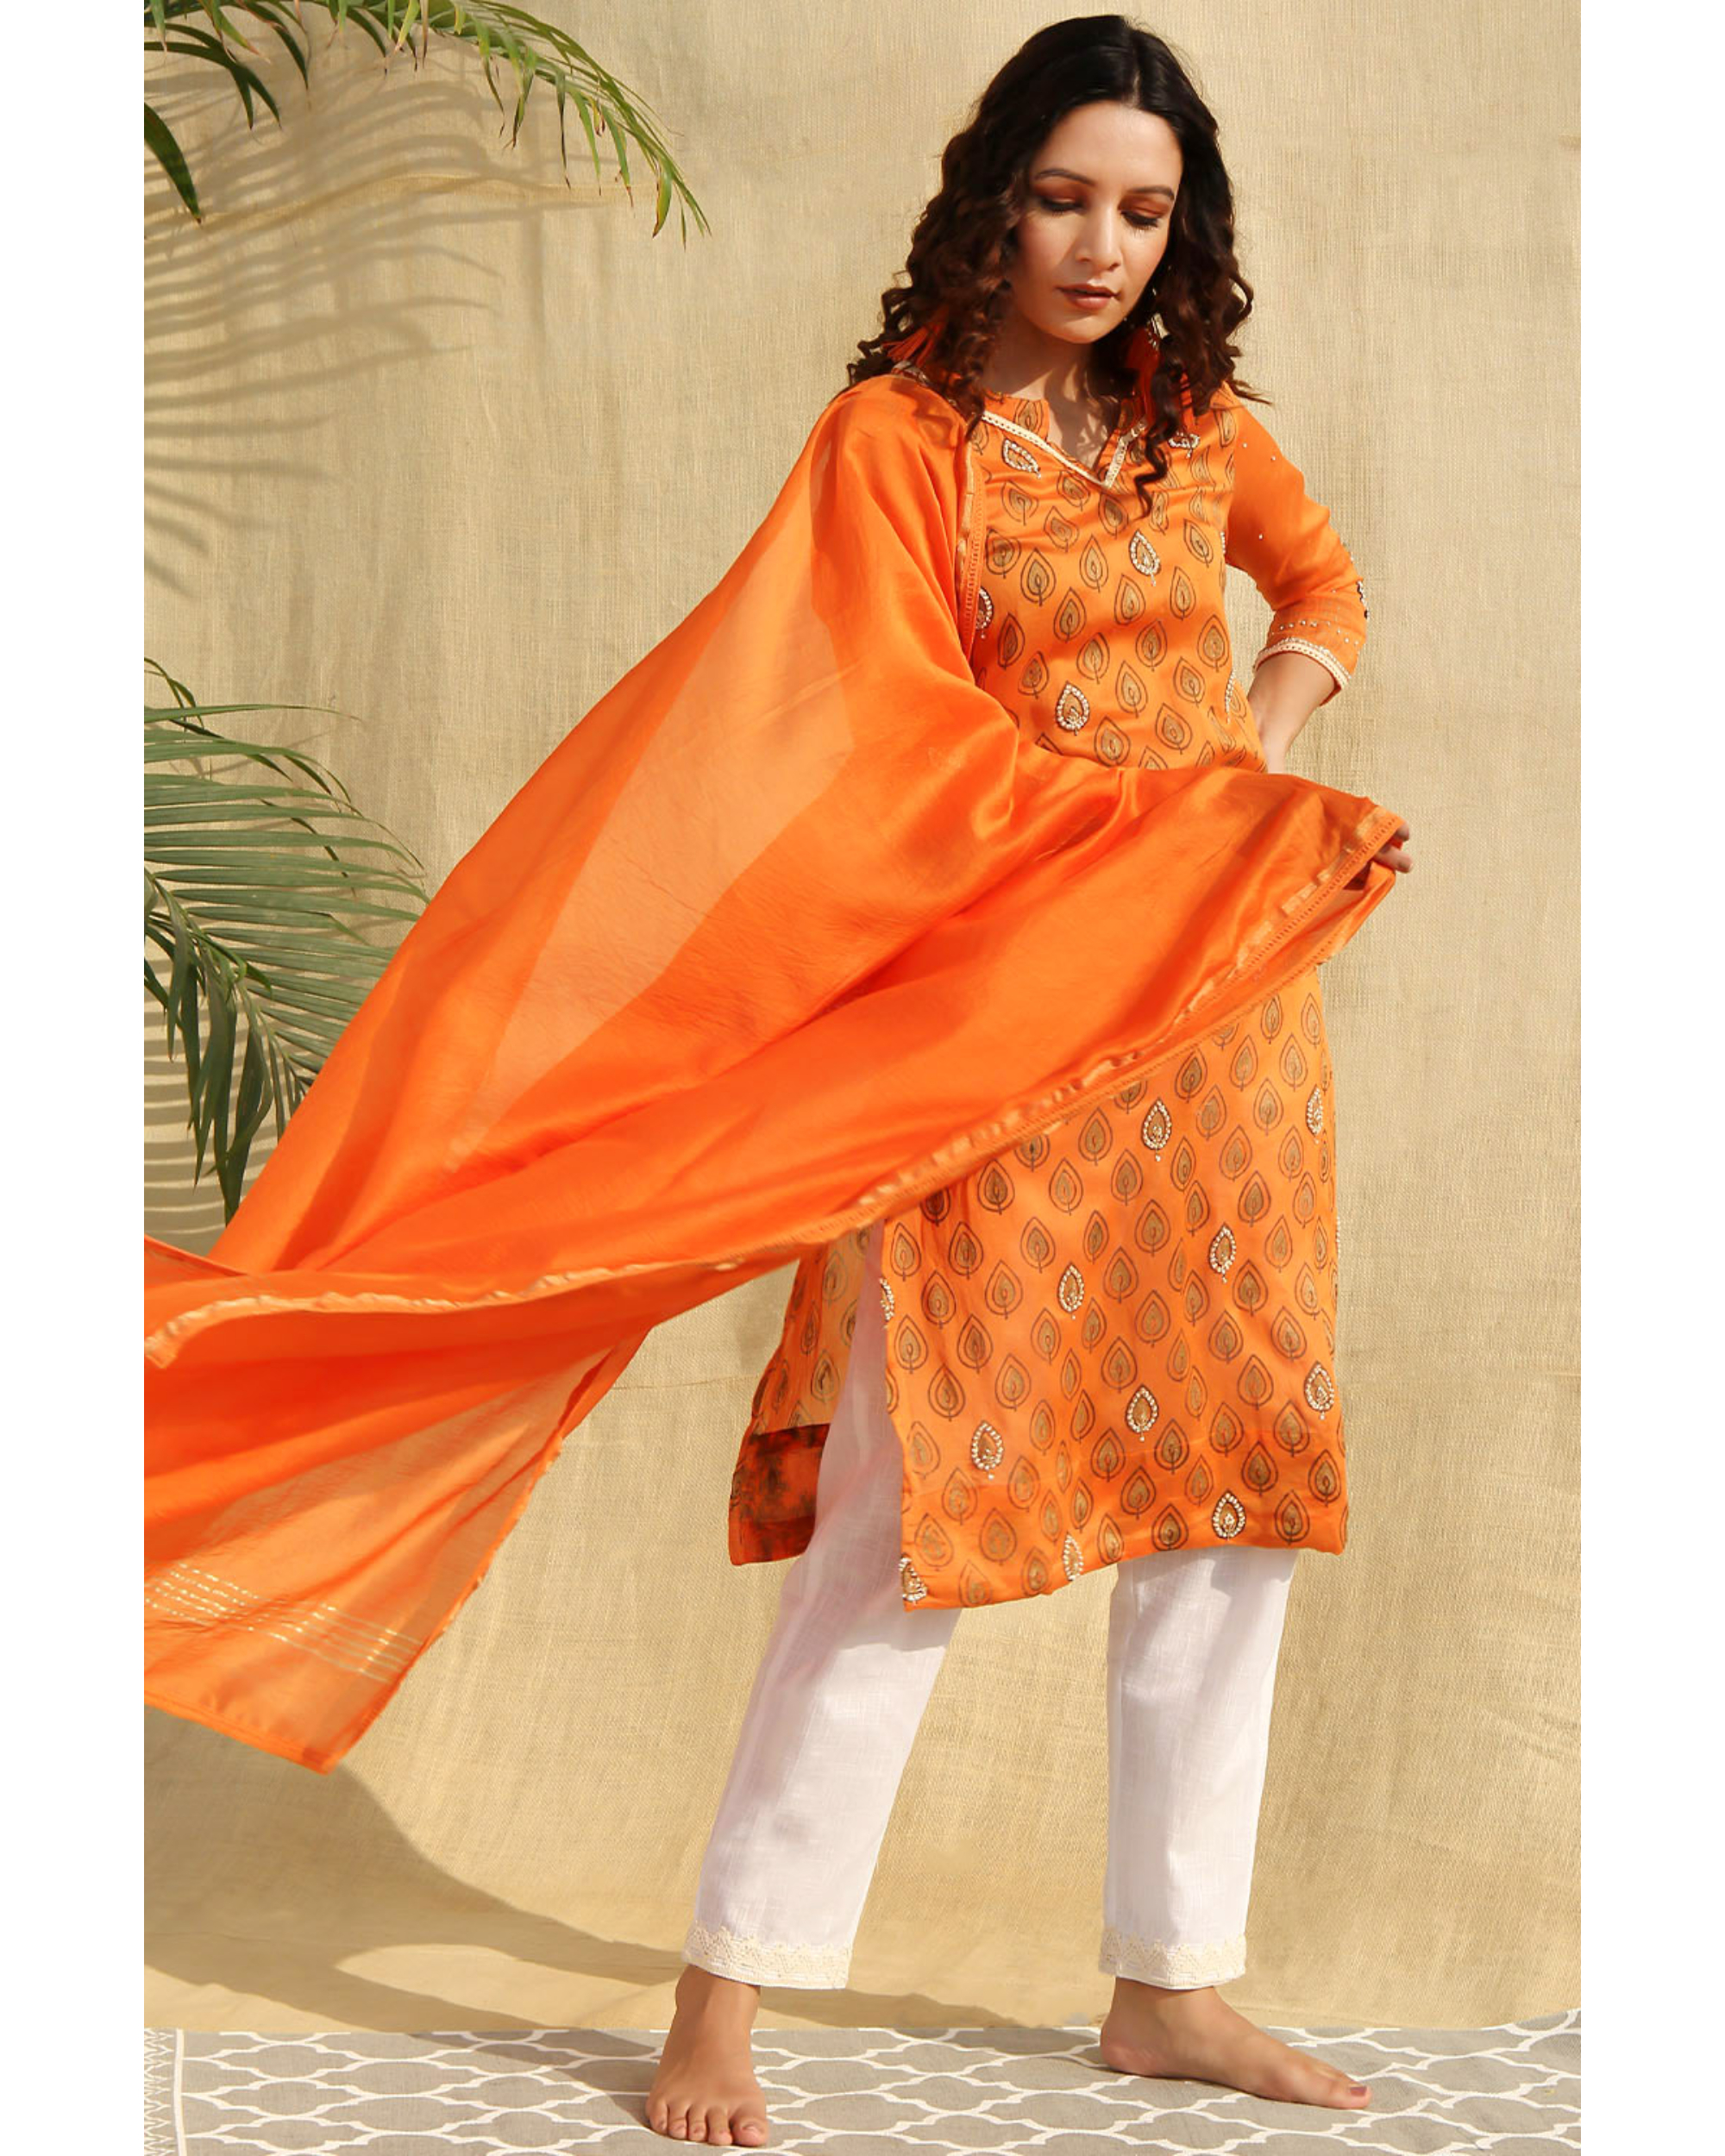 Readymade Off White Chanderi Suit With Brocade Dupatta 4109SL02